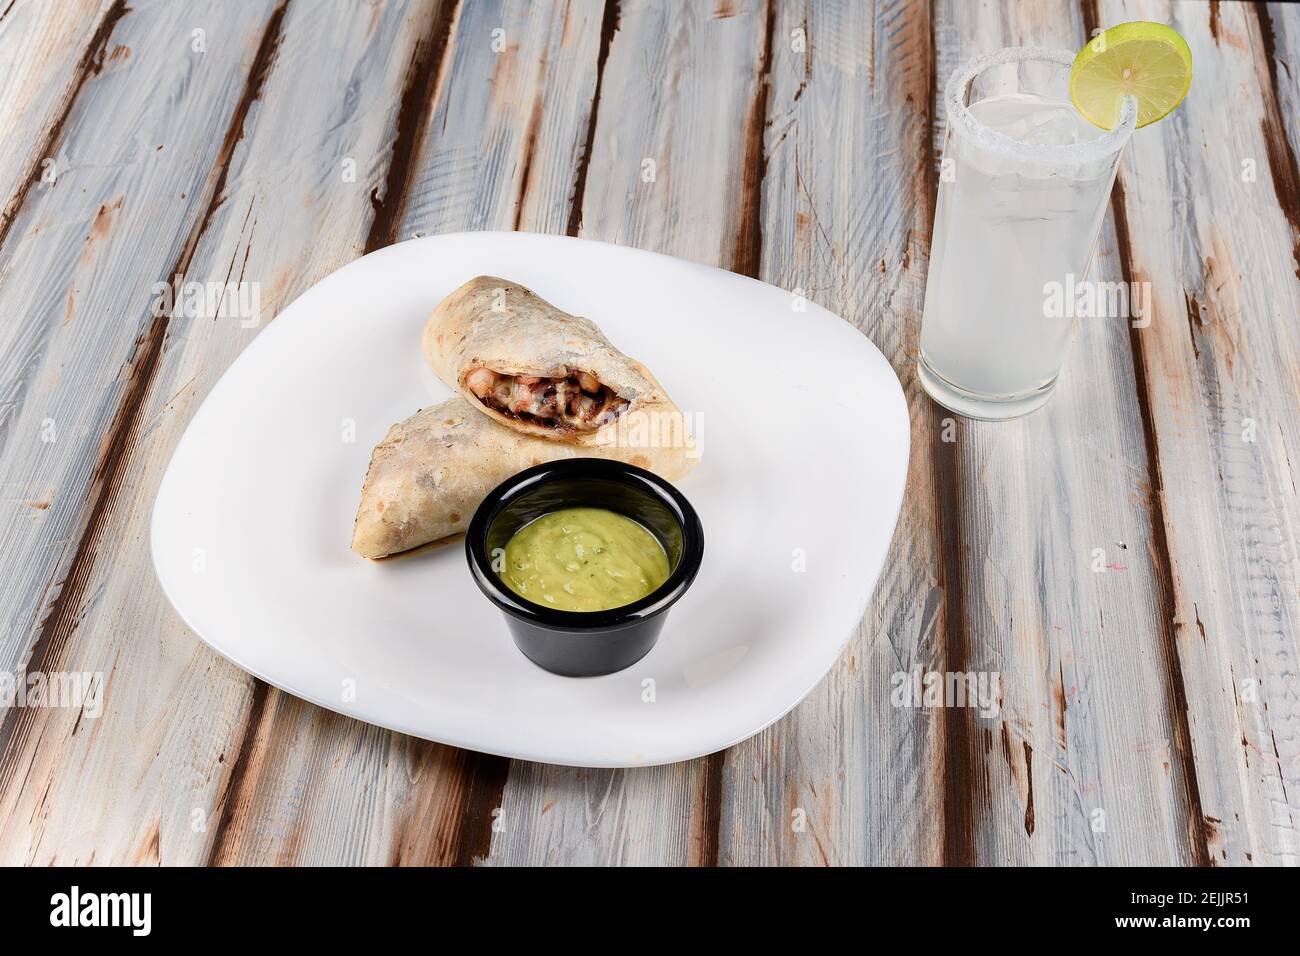 Closeup of a taco or burrito served with Mexican guacamole on a table Stock Photo